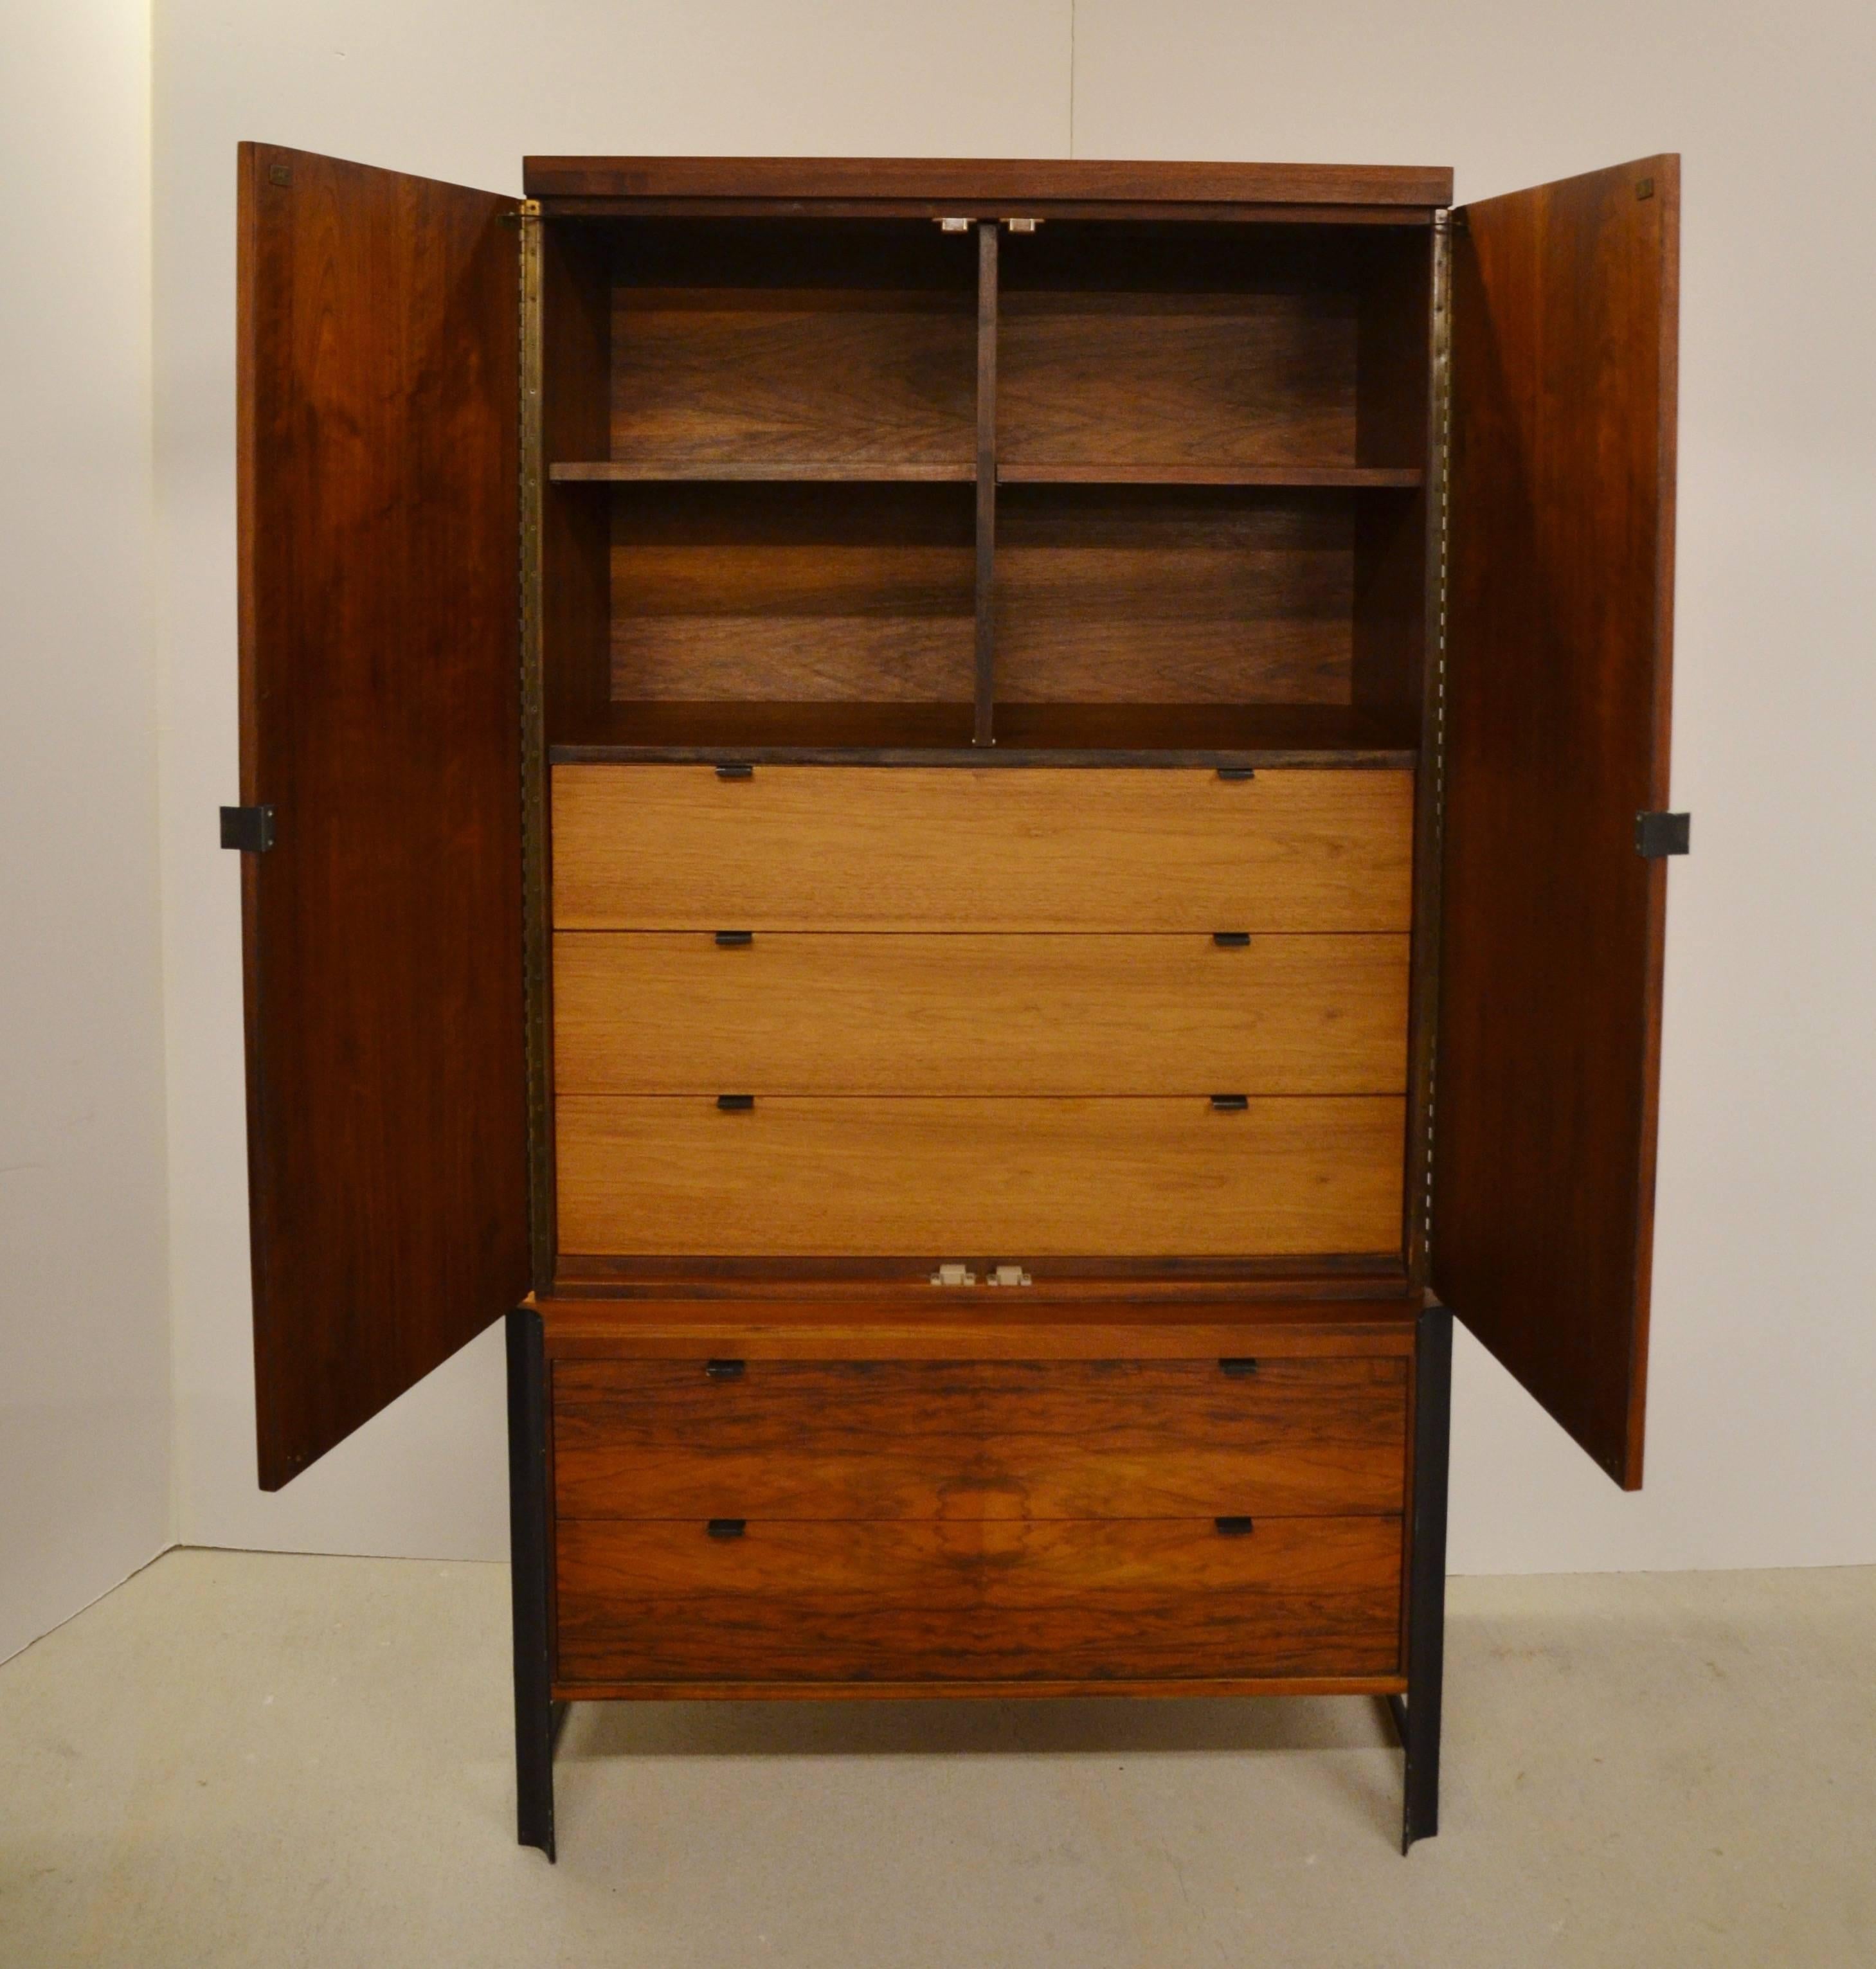 Handsome Mid-Century cabinet by Romweber with flamed wood and unique black steel hardware. Two drawers at base and three additional drawers behind double doors at top. Upper storage compartment has shelves or removable panel allowing placement of TV